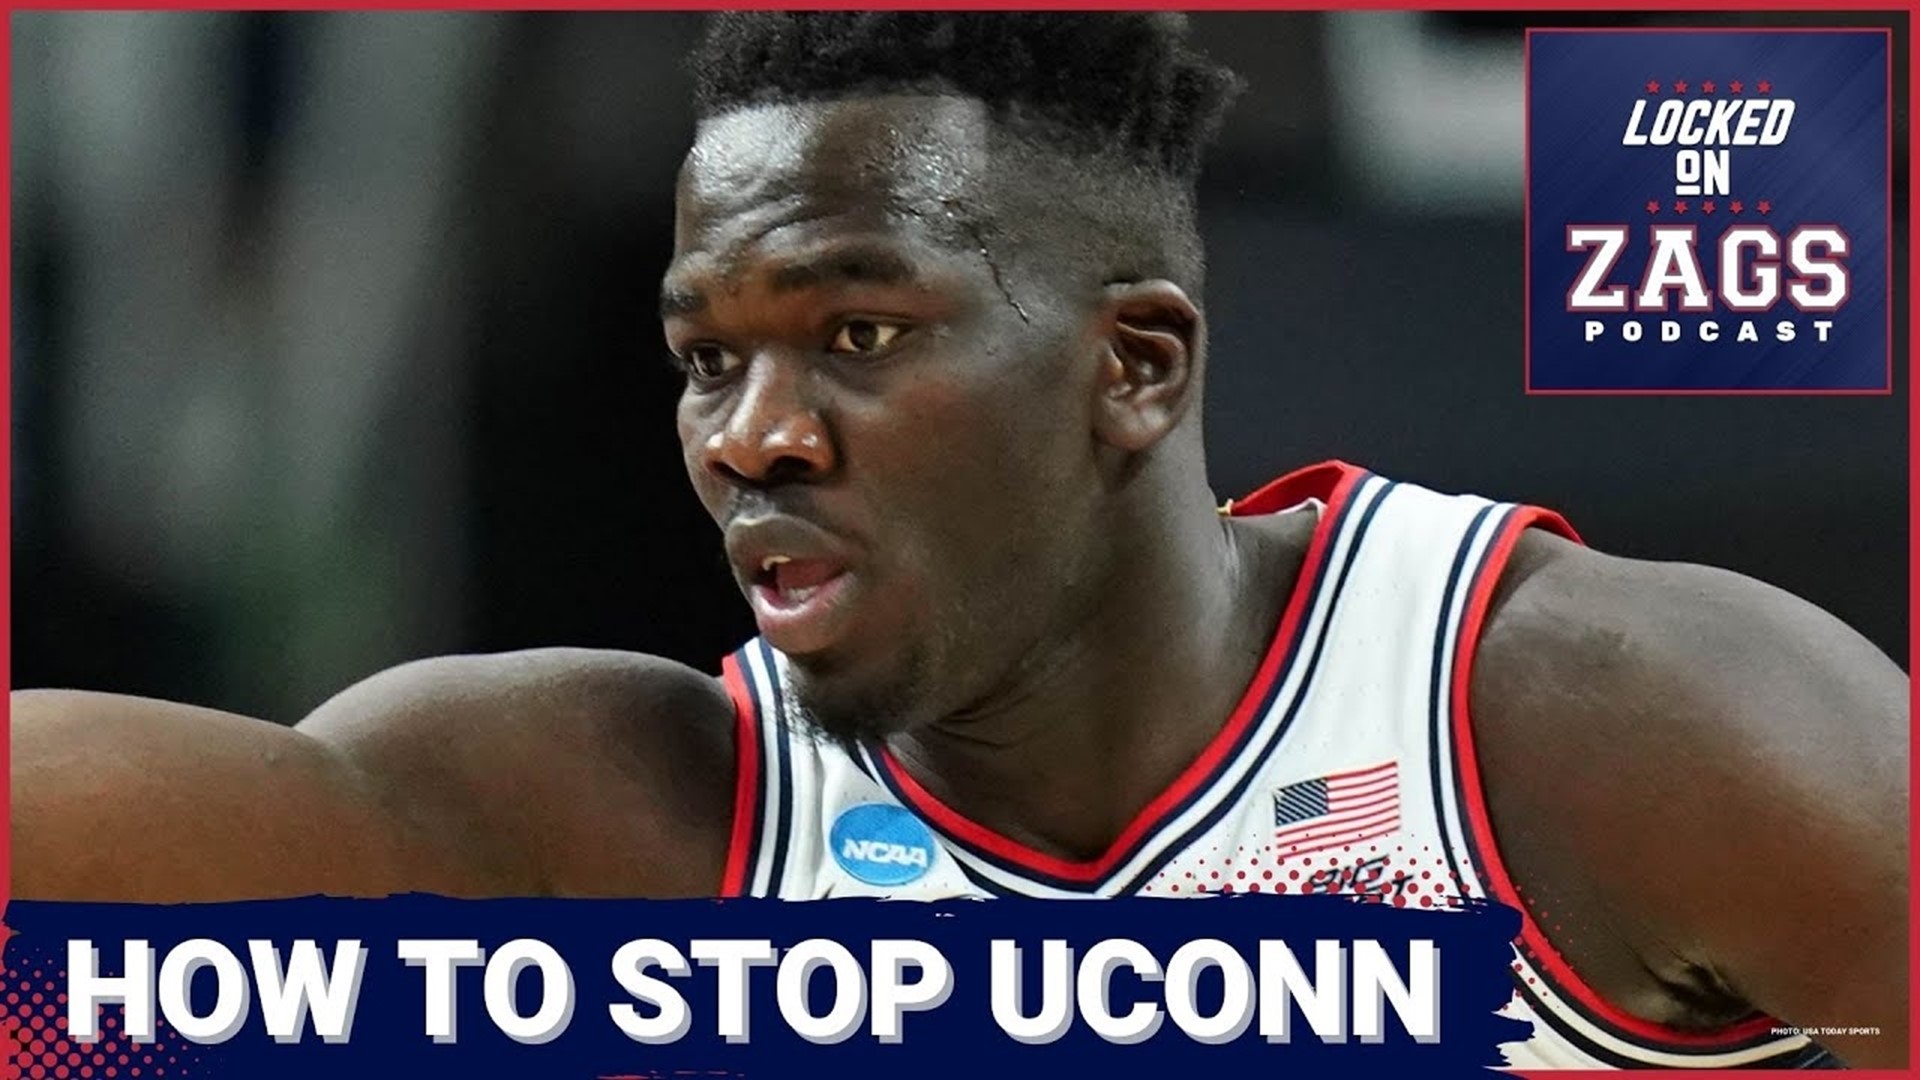 The Gonzaga Bulldogs take on the UConn Huskies for a chance to go to the Final 4. Can the Zags slow down dynamic offensive threat Adama Sanogo?